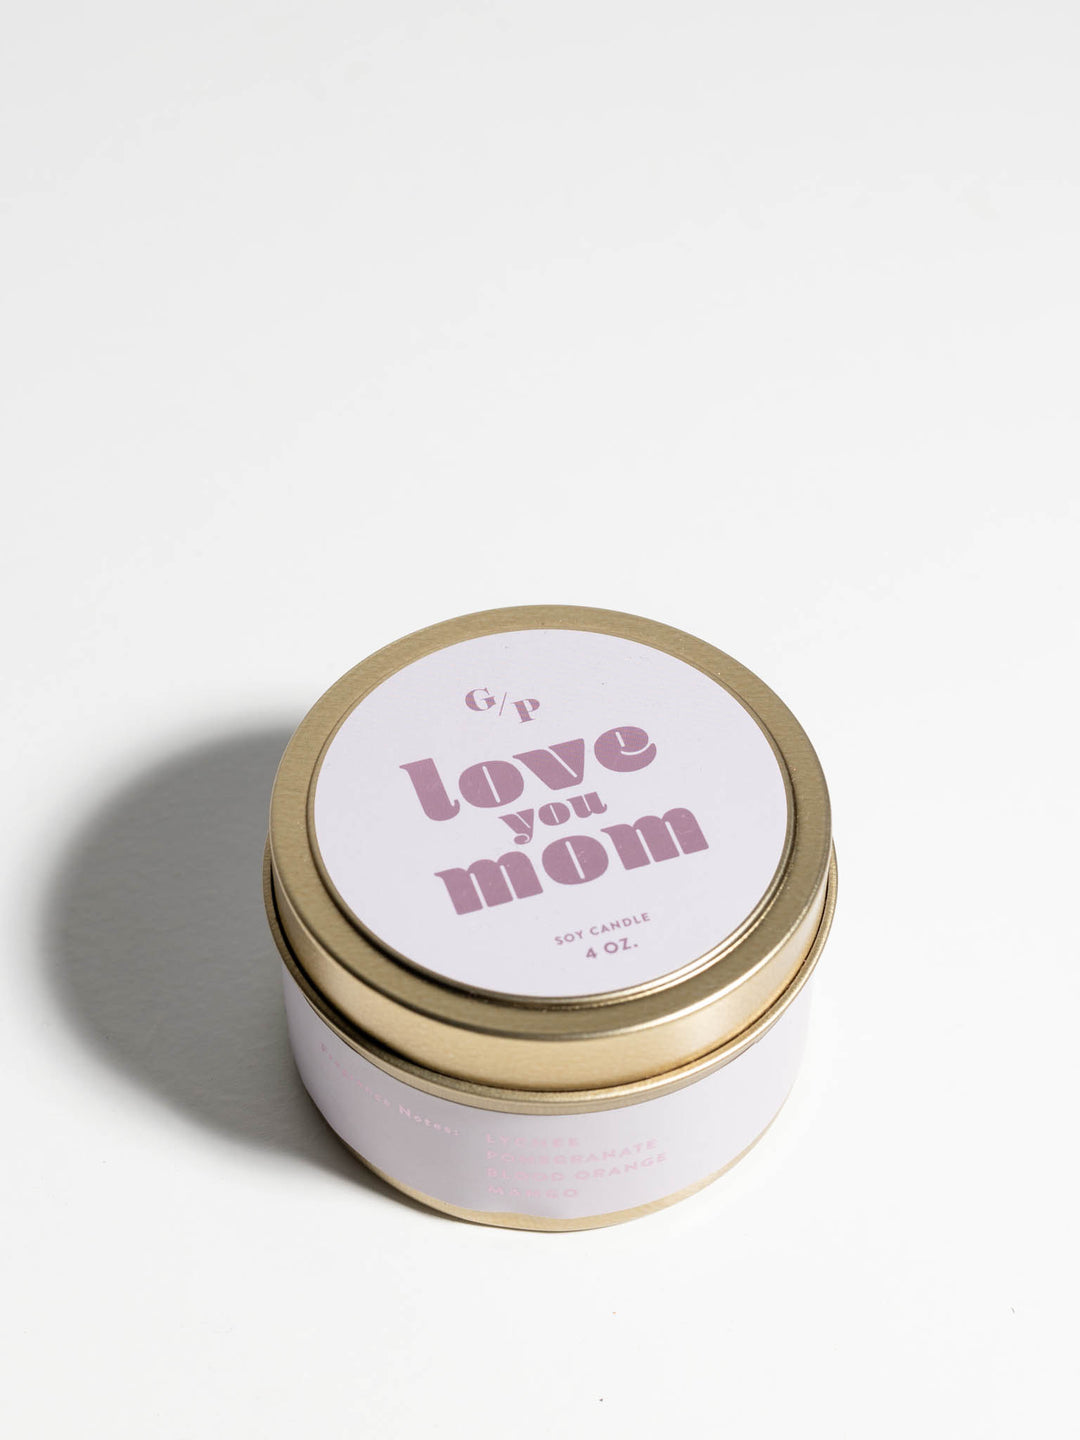 love you mom candle